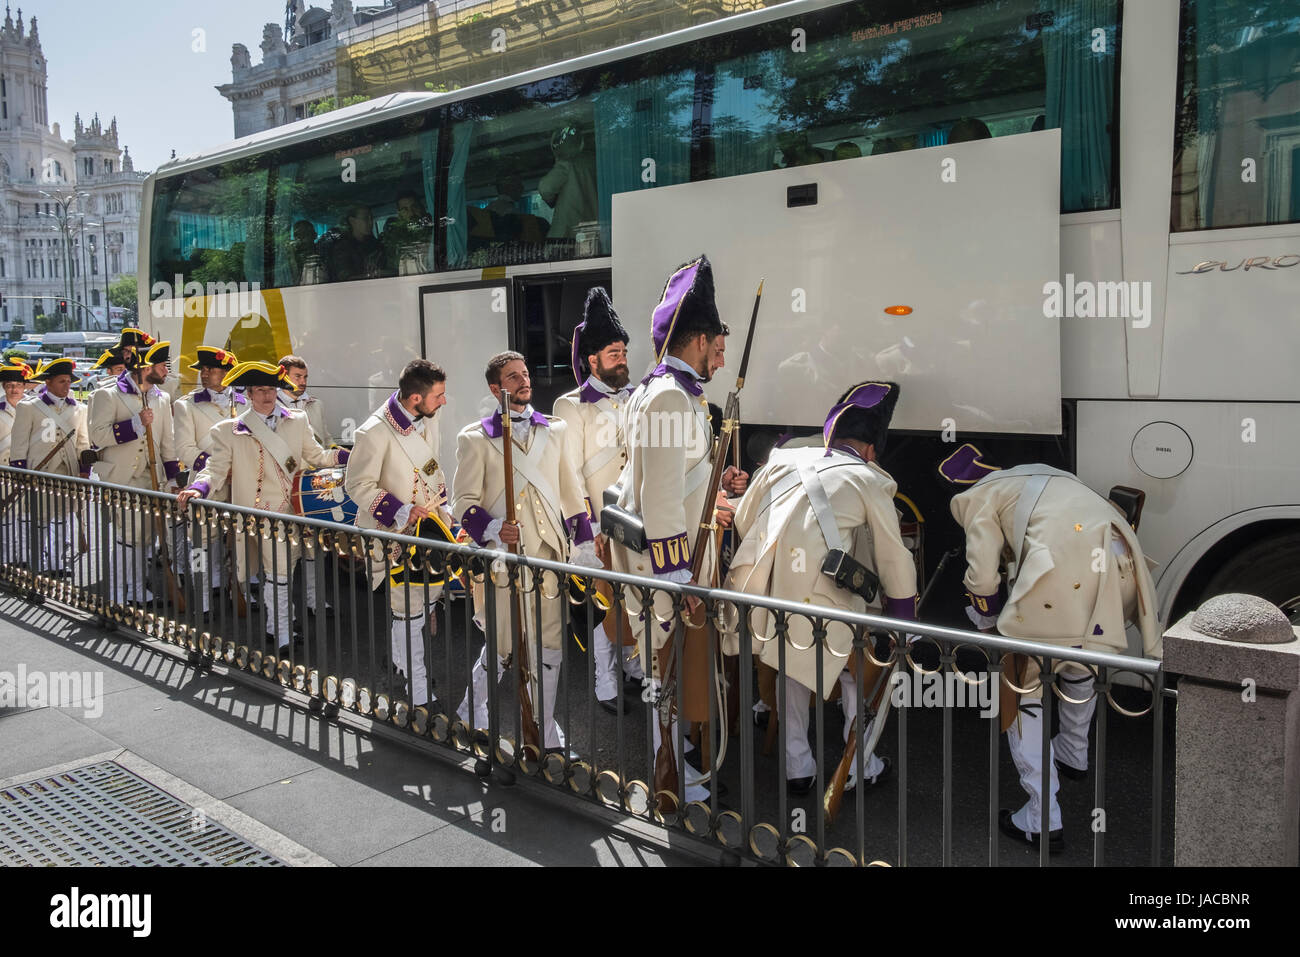 Men wearing ceremonial military uniform queuing to board a bus, Madrid, Spain Stock Photo